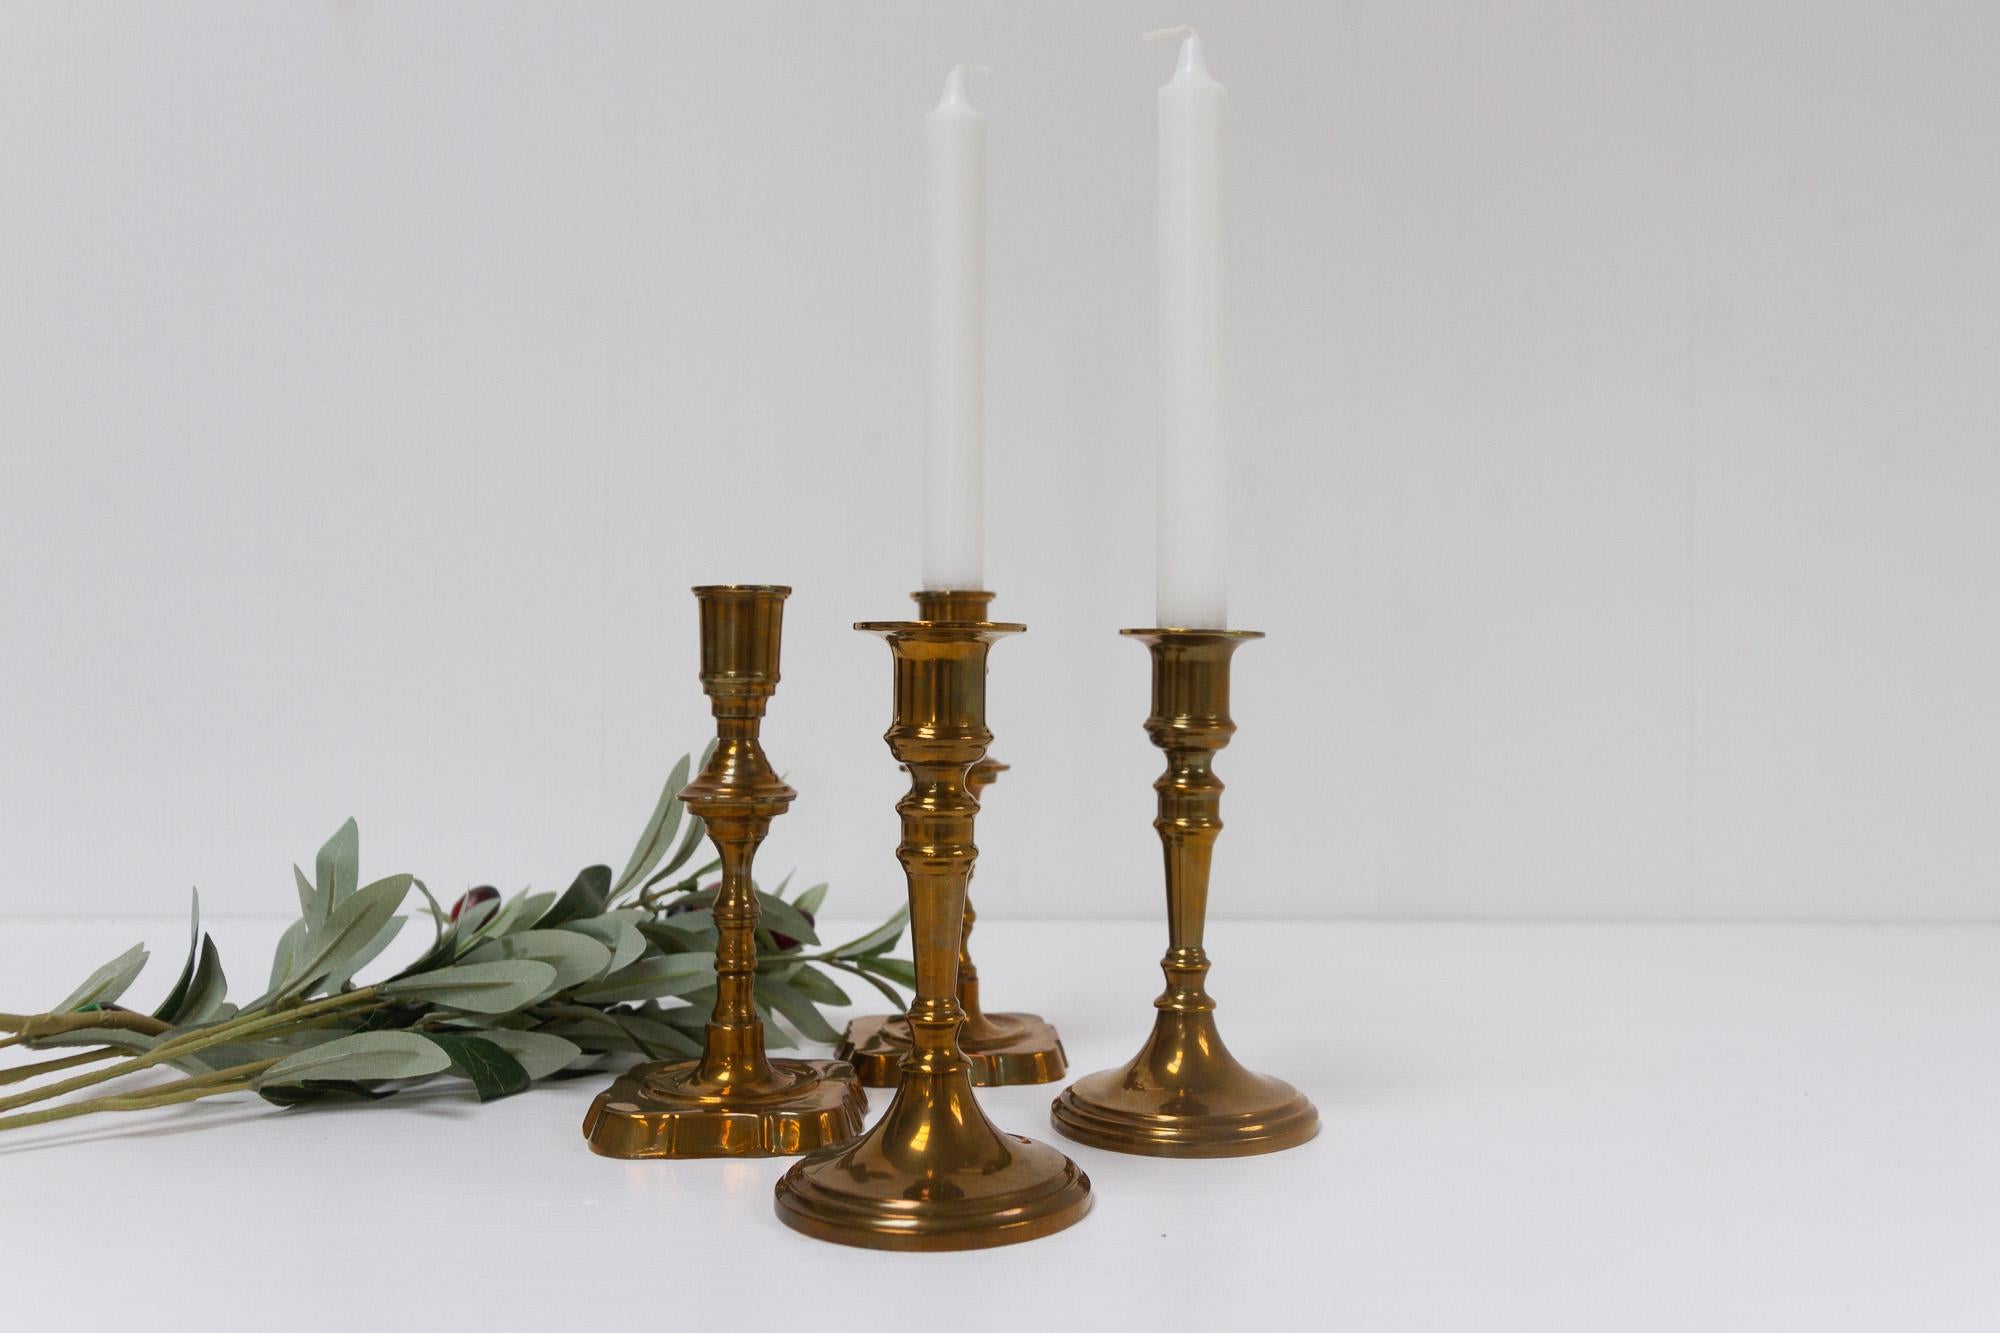 Vintage Danish Malm Candle Holders, 1950s. Set of 4. For Sale 2